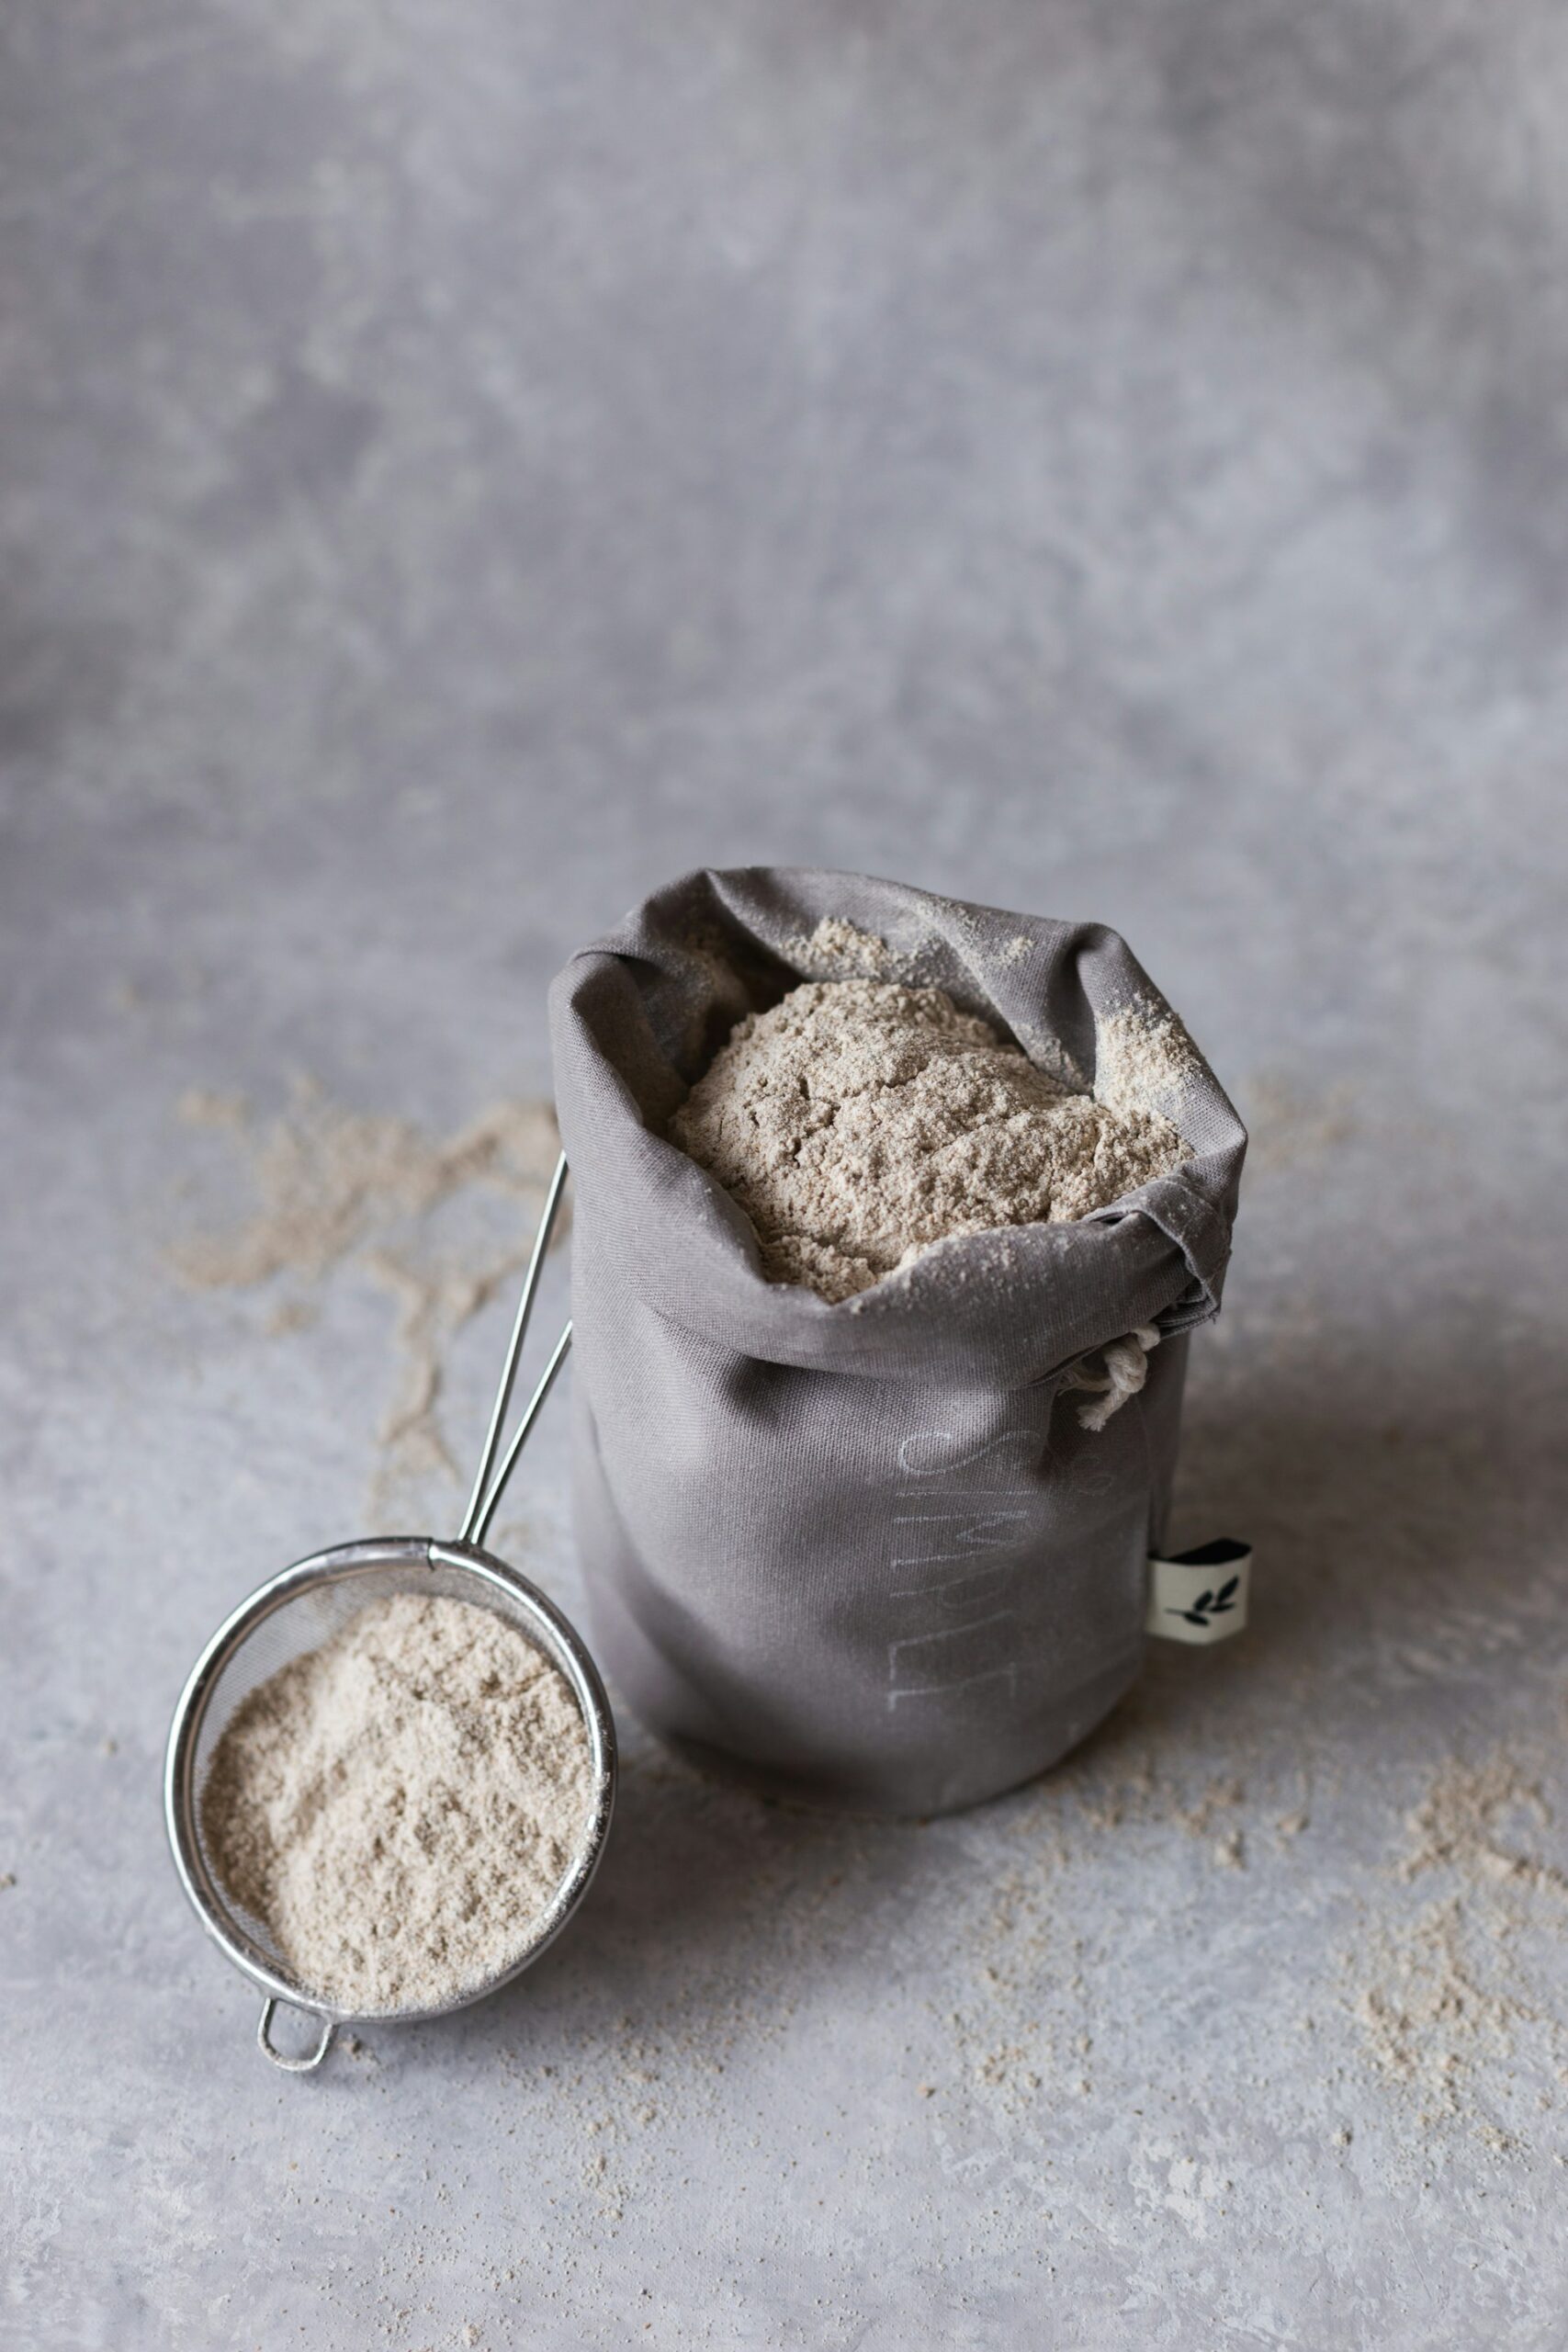 a small bag of flour and sieve